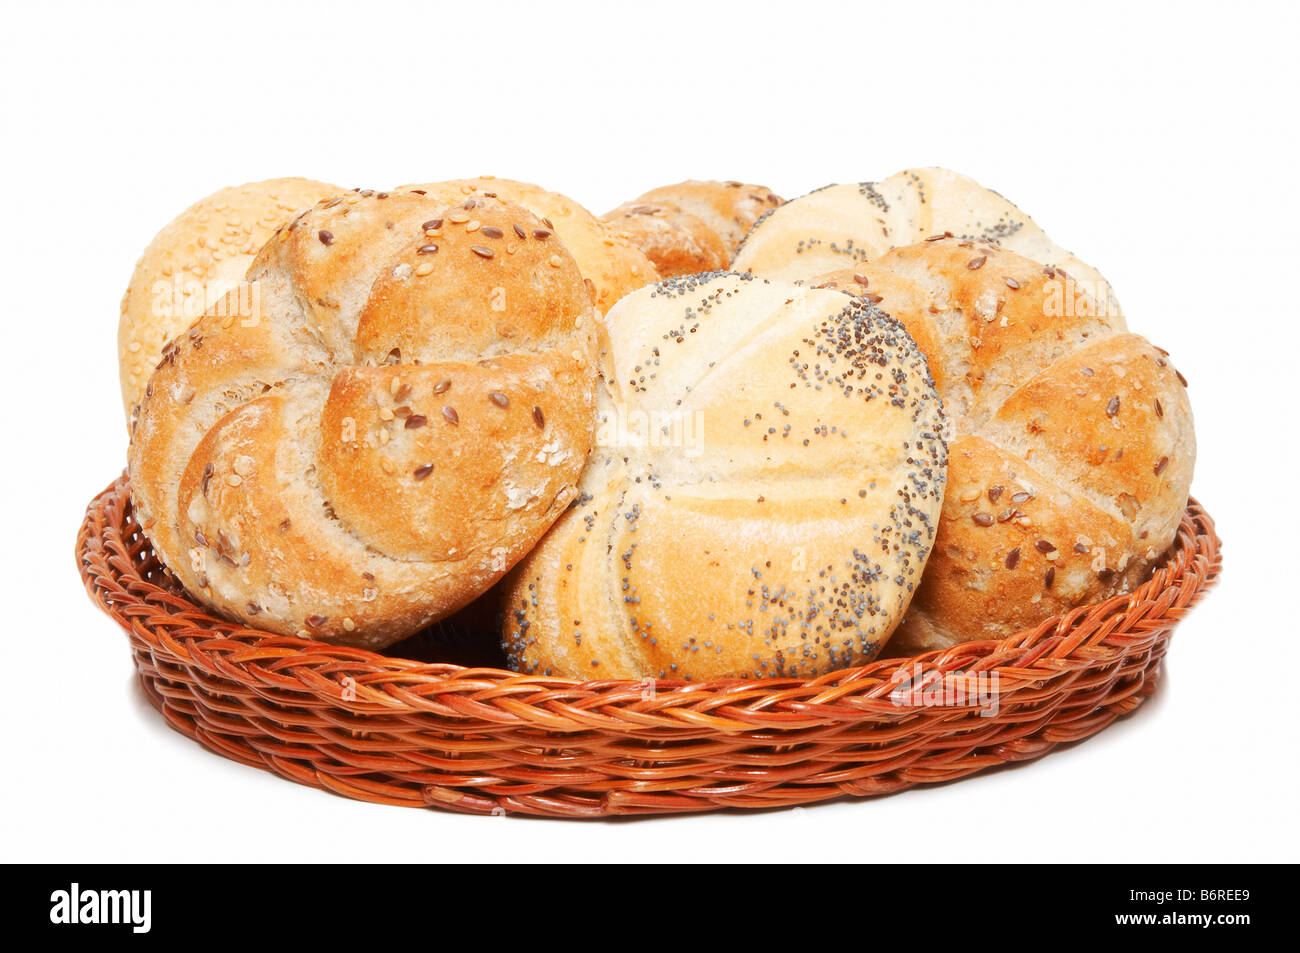 basket with bakery products Stock Photo